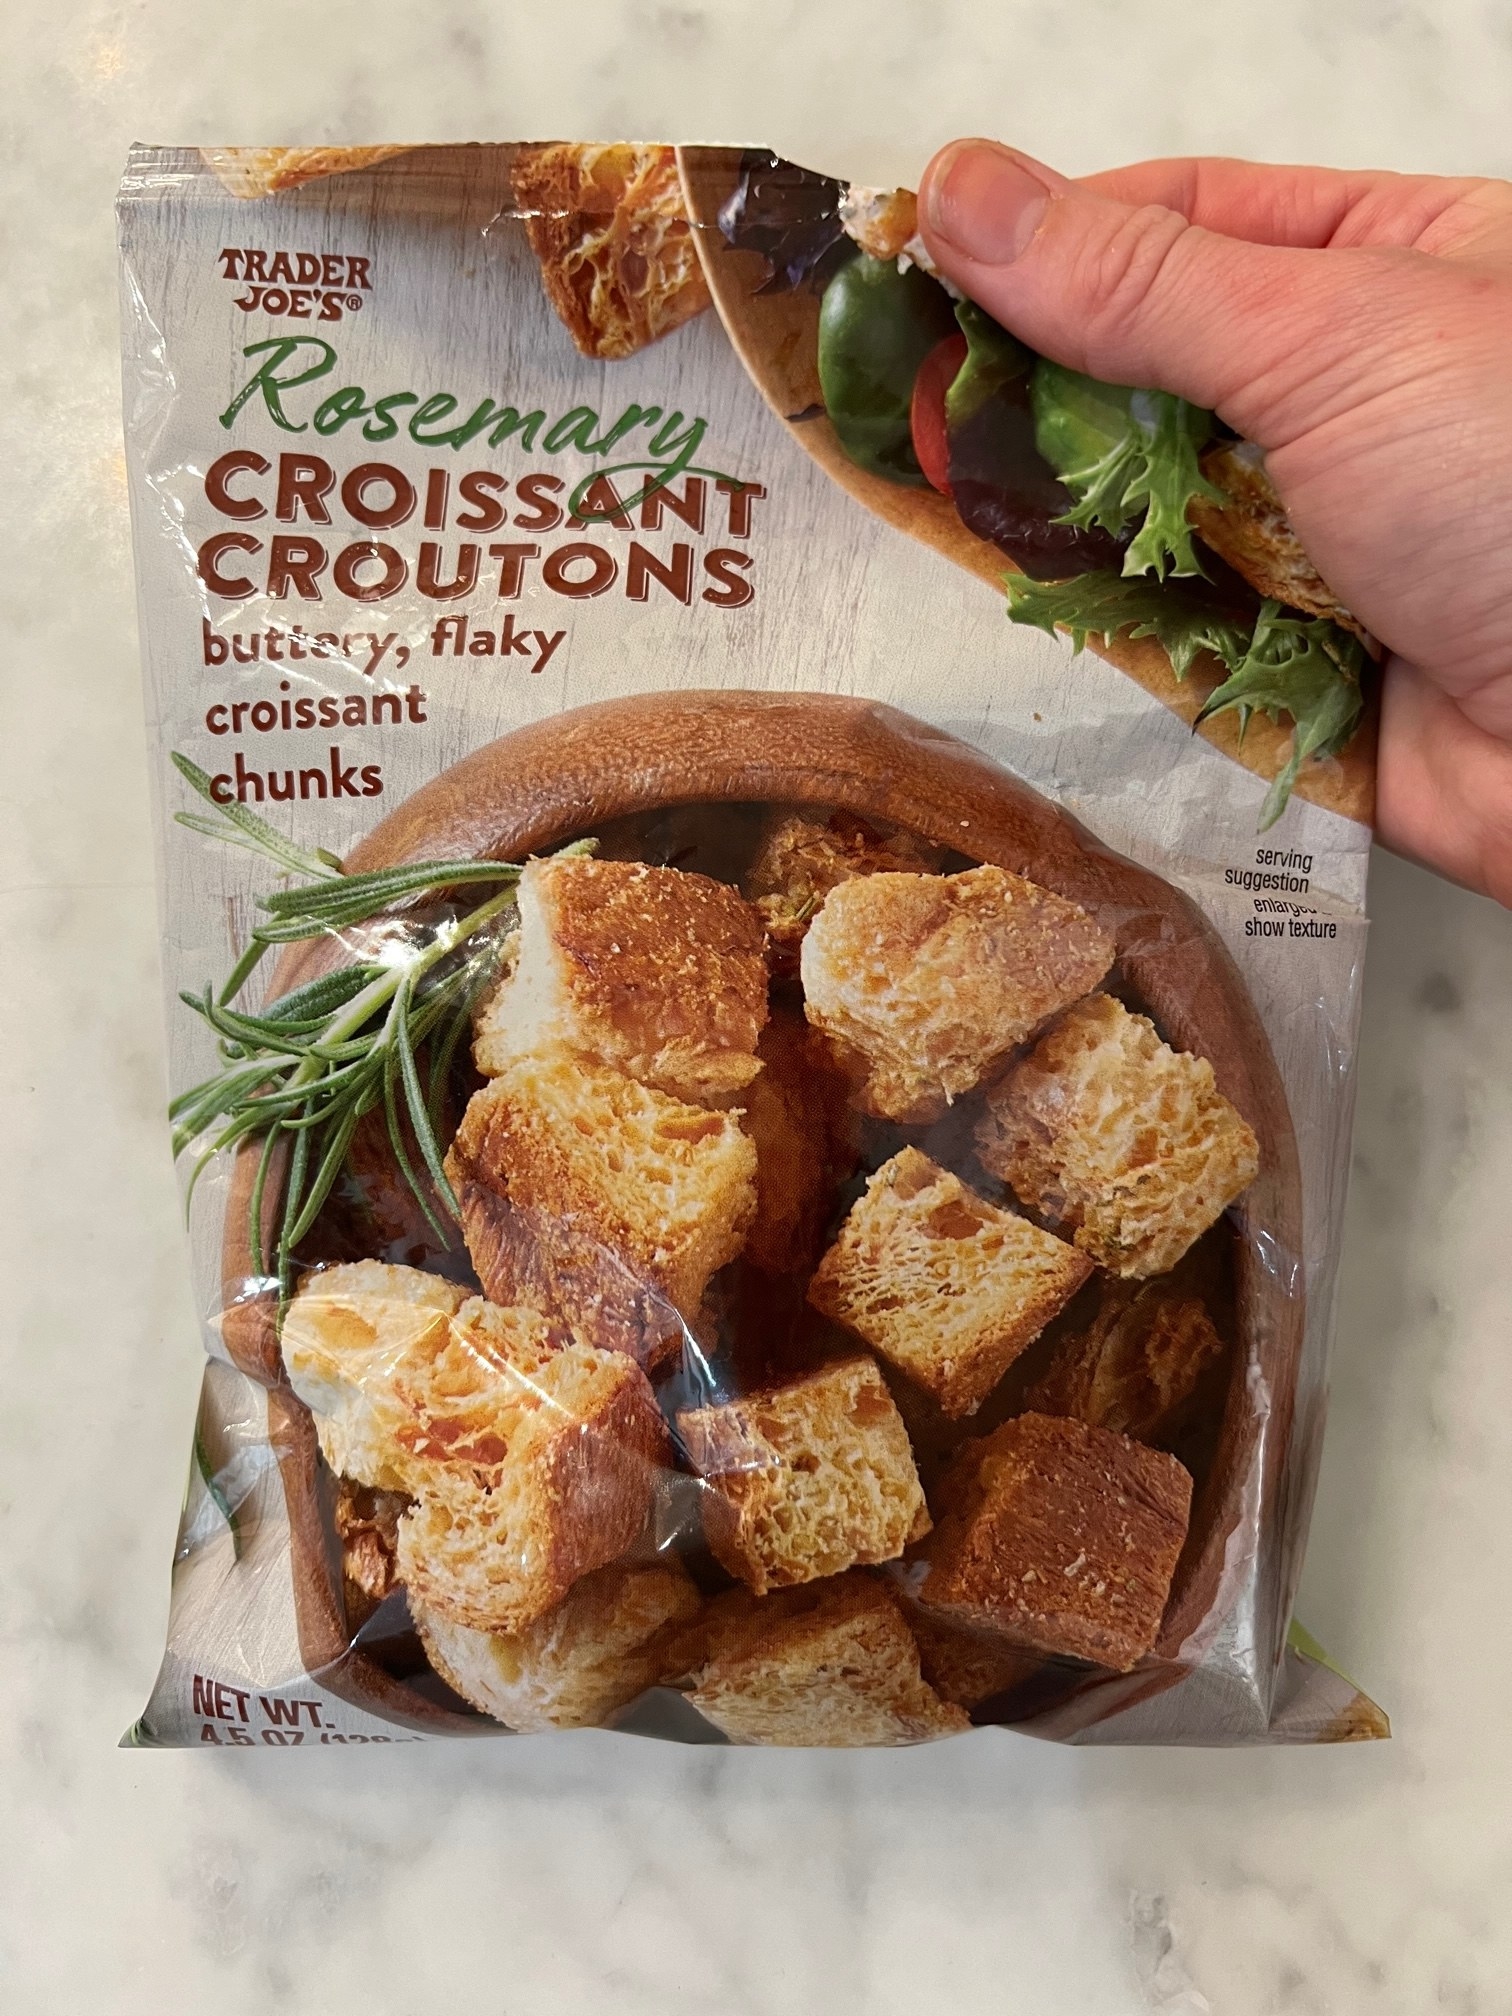 Rosemary Croissant Croutons